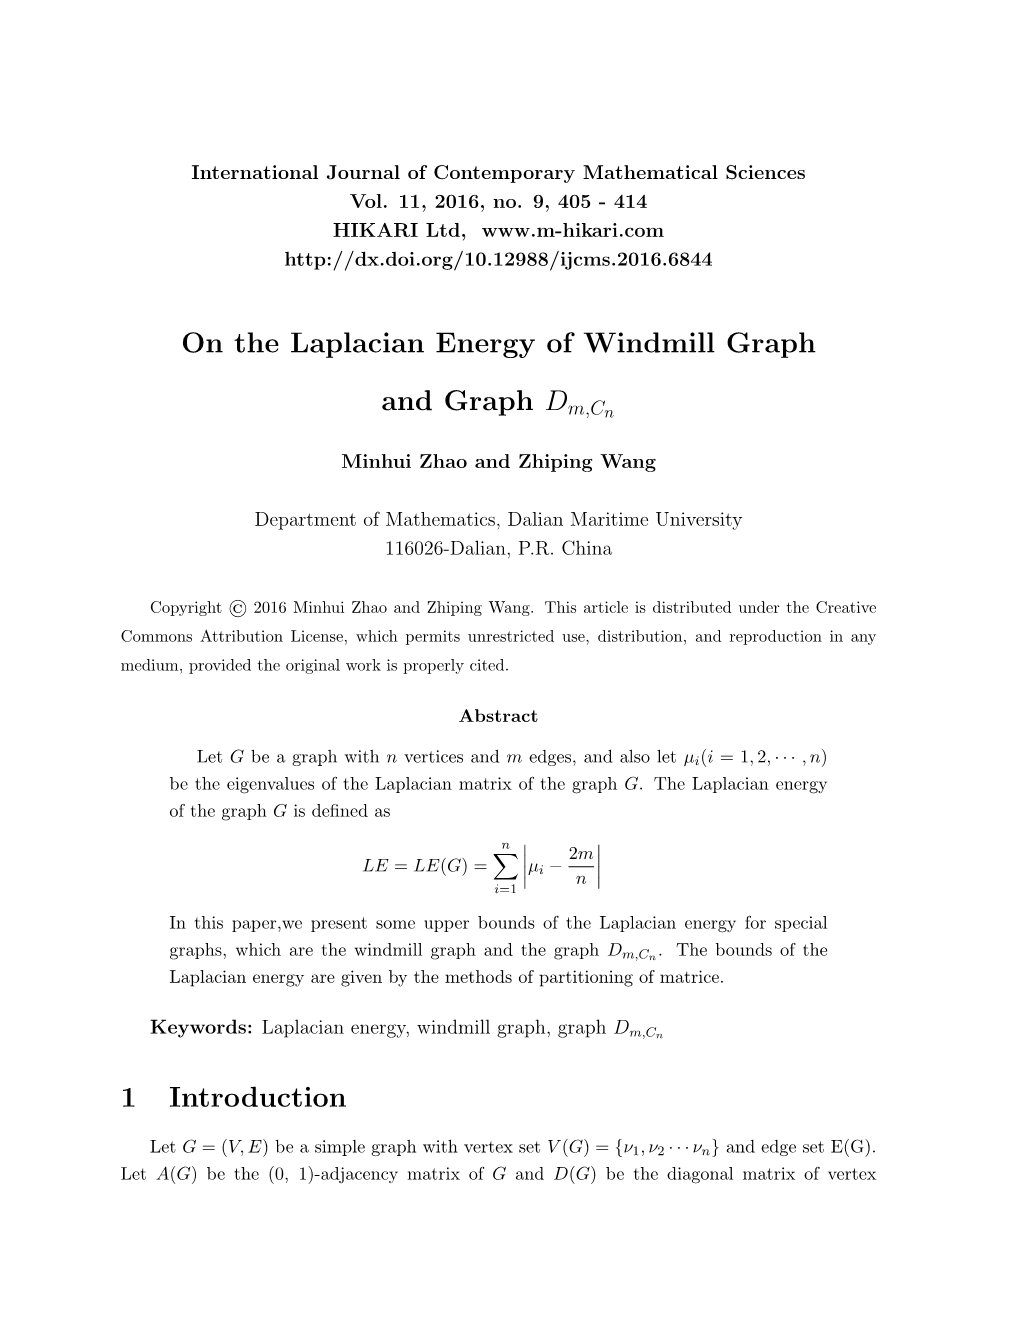 On the Laplacian Energy of Windmill Graph and Graph D {M